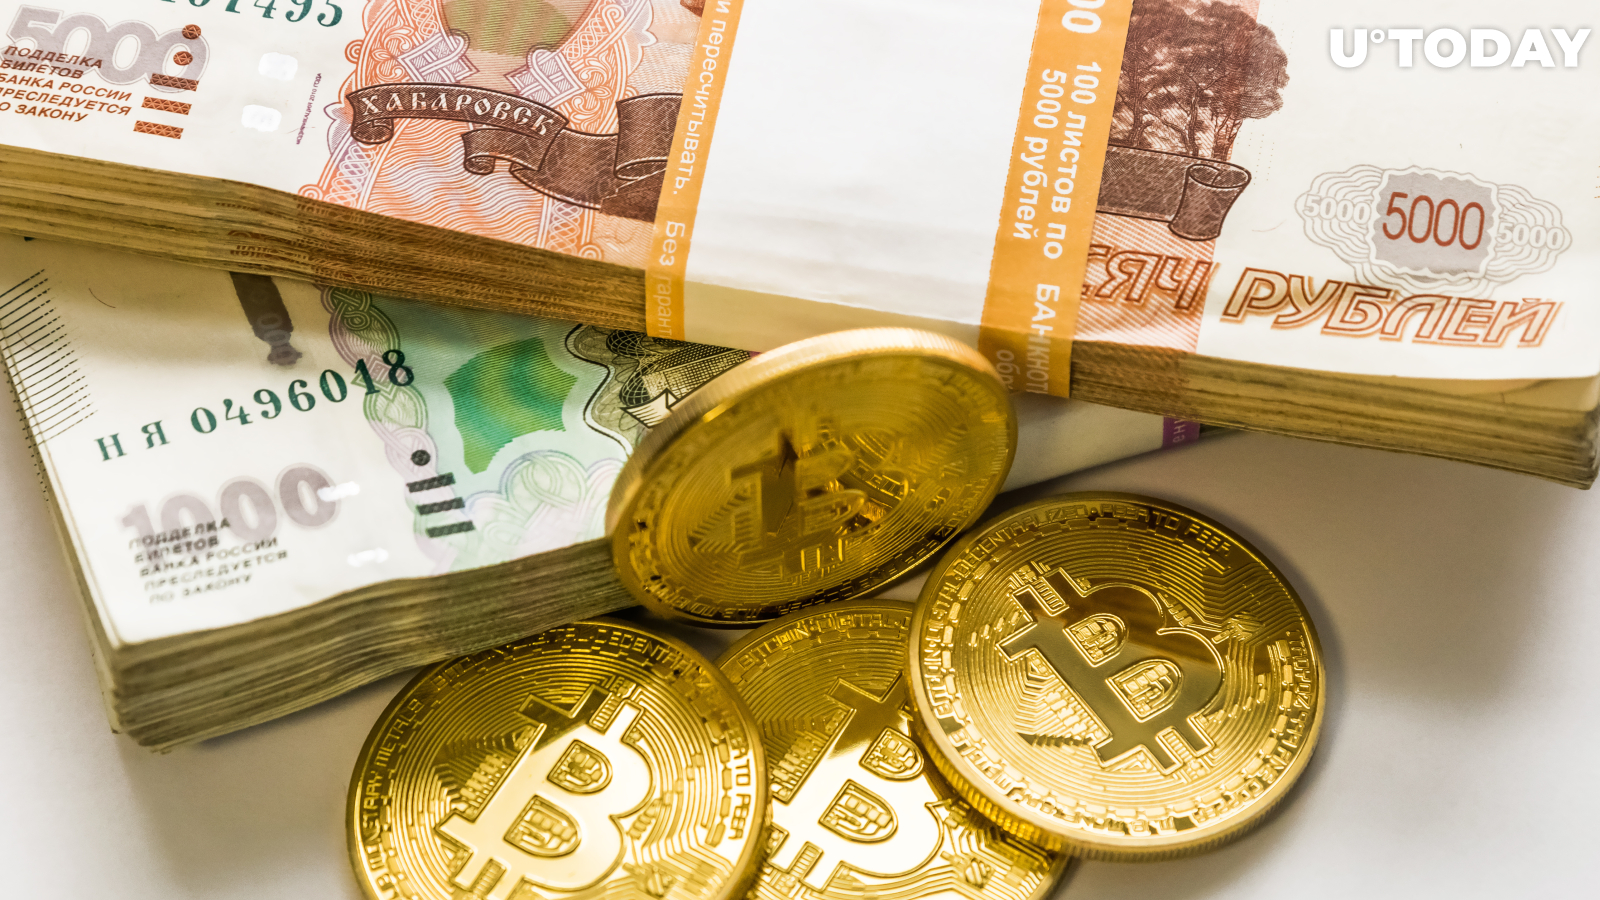 Bitcoin Surpasses Thai Baht and Russian Ruble, Becoming 14th Biggest Global Currency